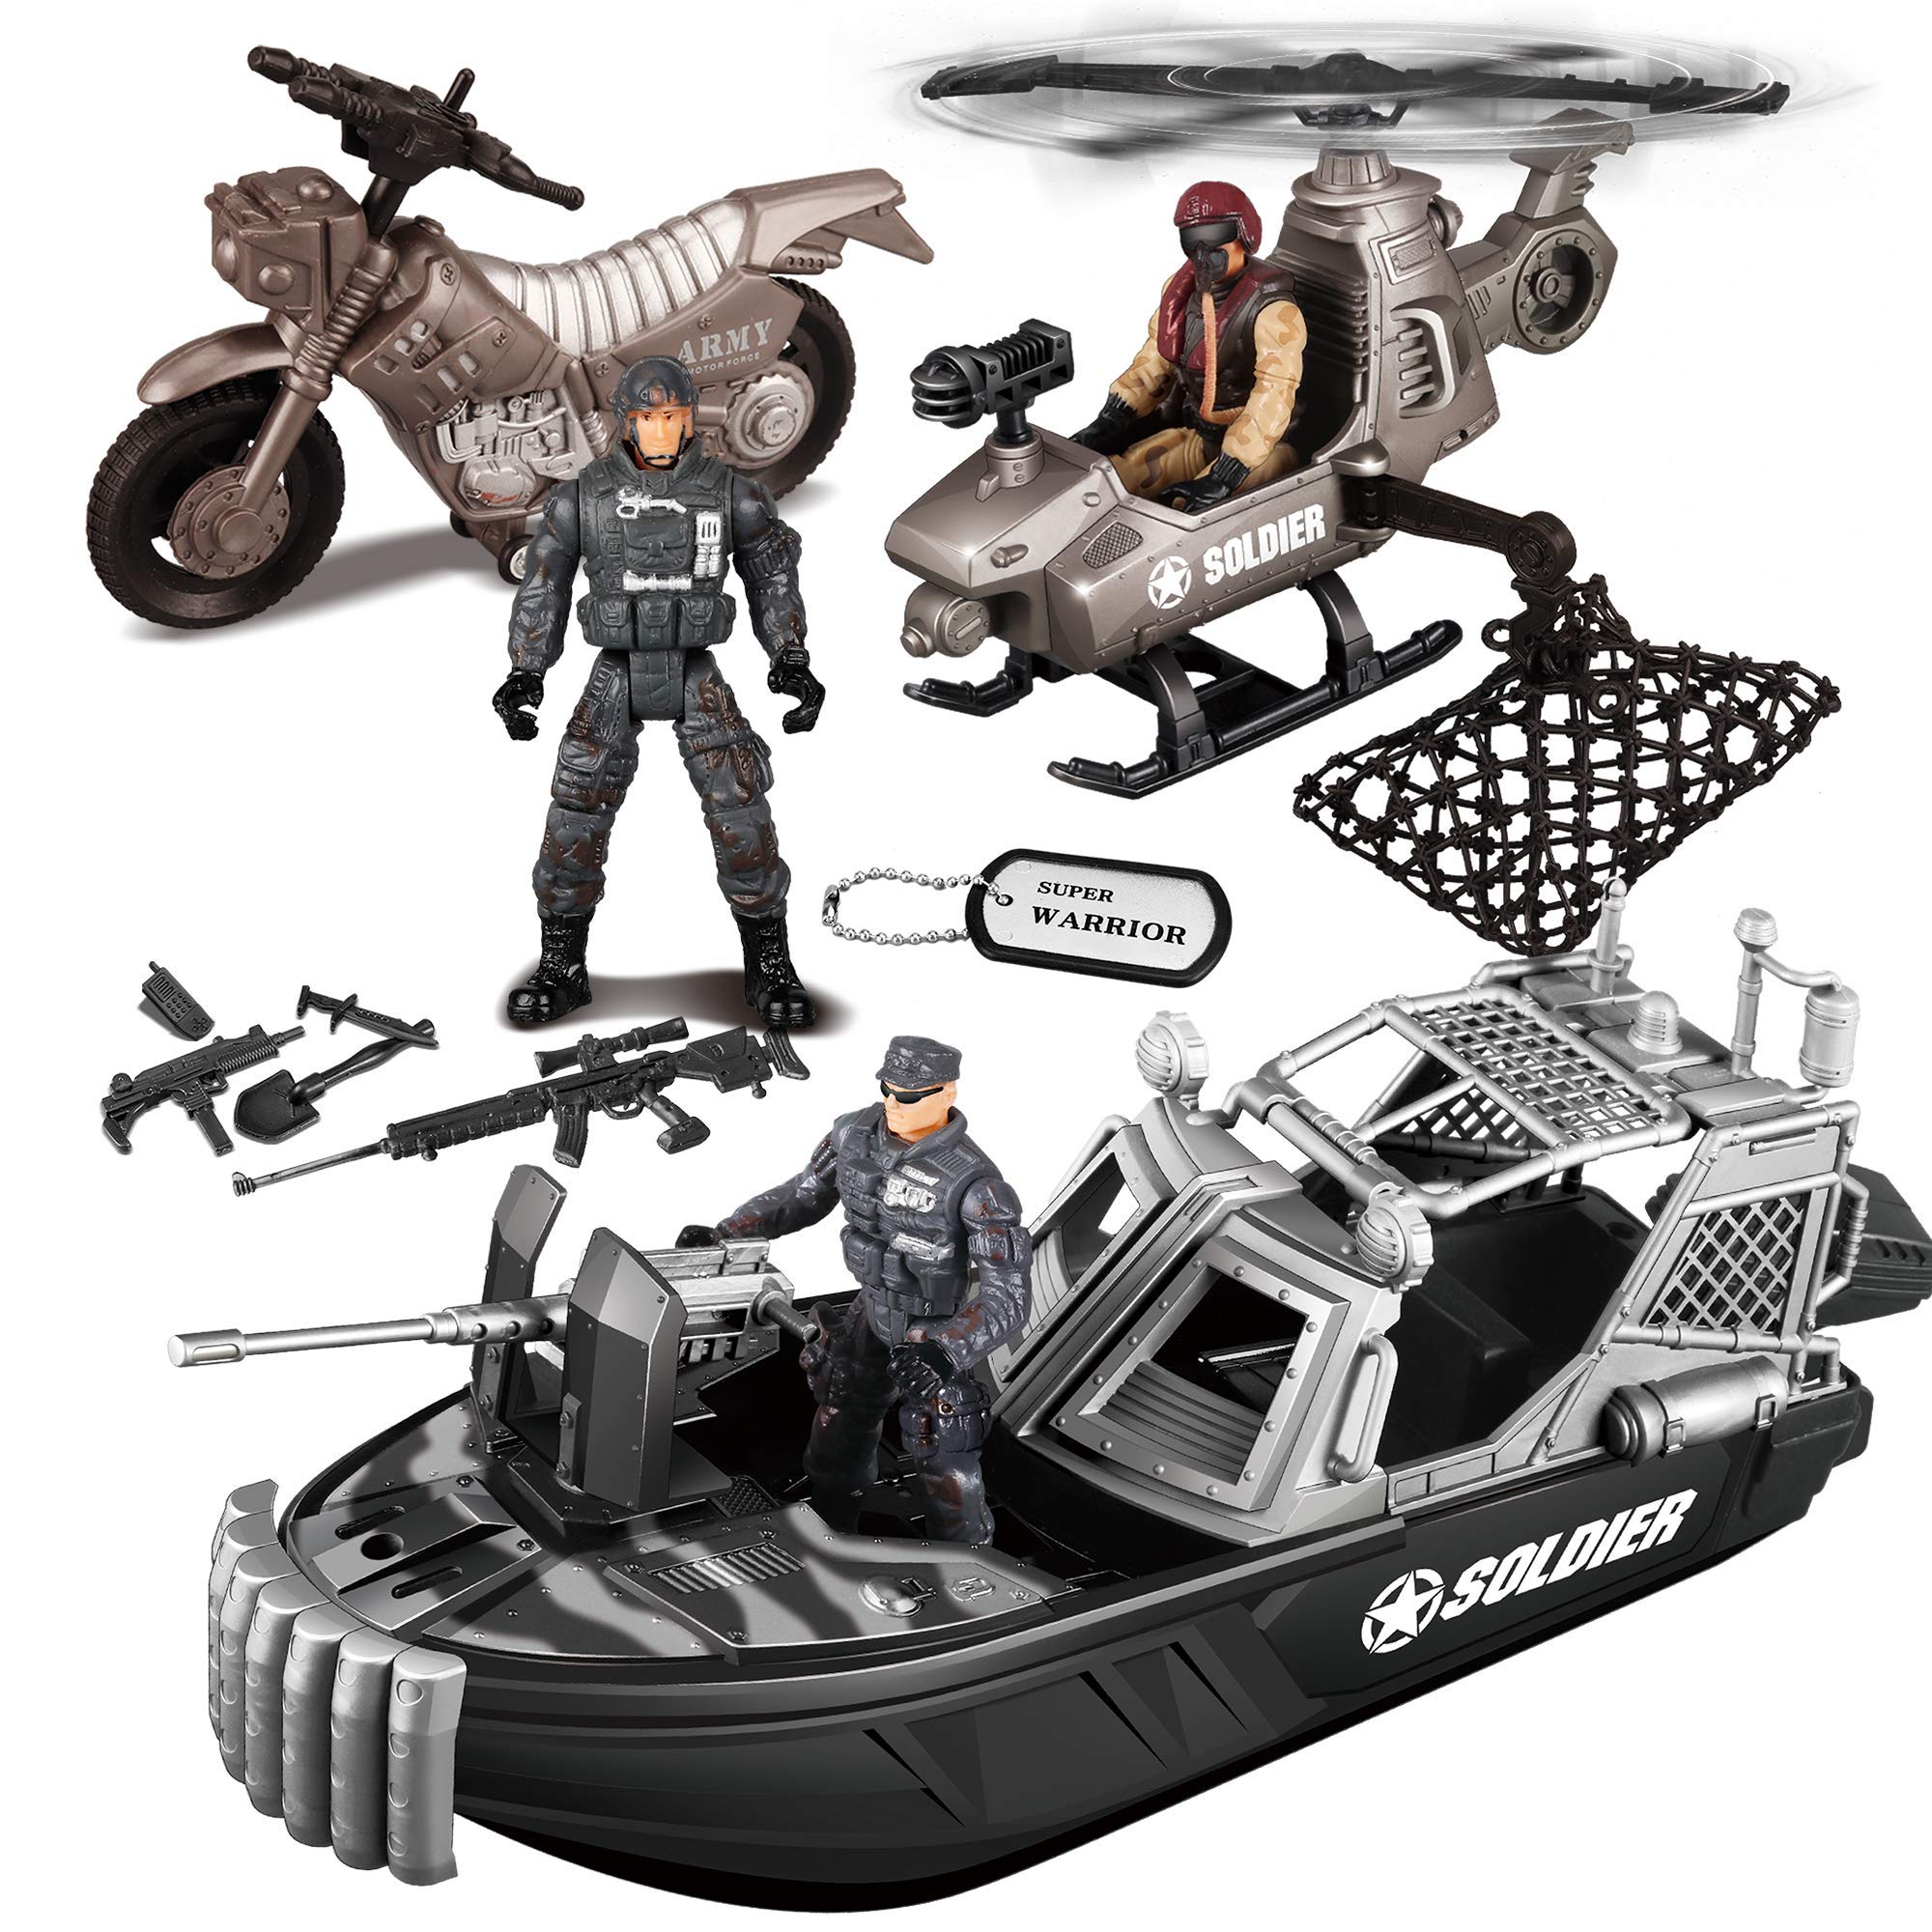 JOYIN 9 Pcs Combat Boat and Military Vehicle Toys Set with Realistic Military Combat Boat, Mini Helicopter, Motorcycle, Army Men Toy Soldiers Action Figures and Other Equipment Accessories